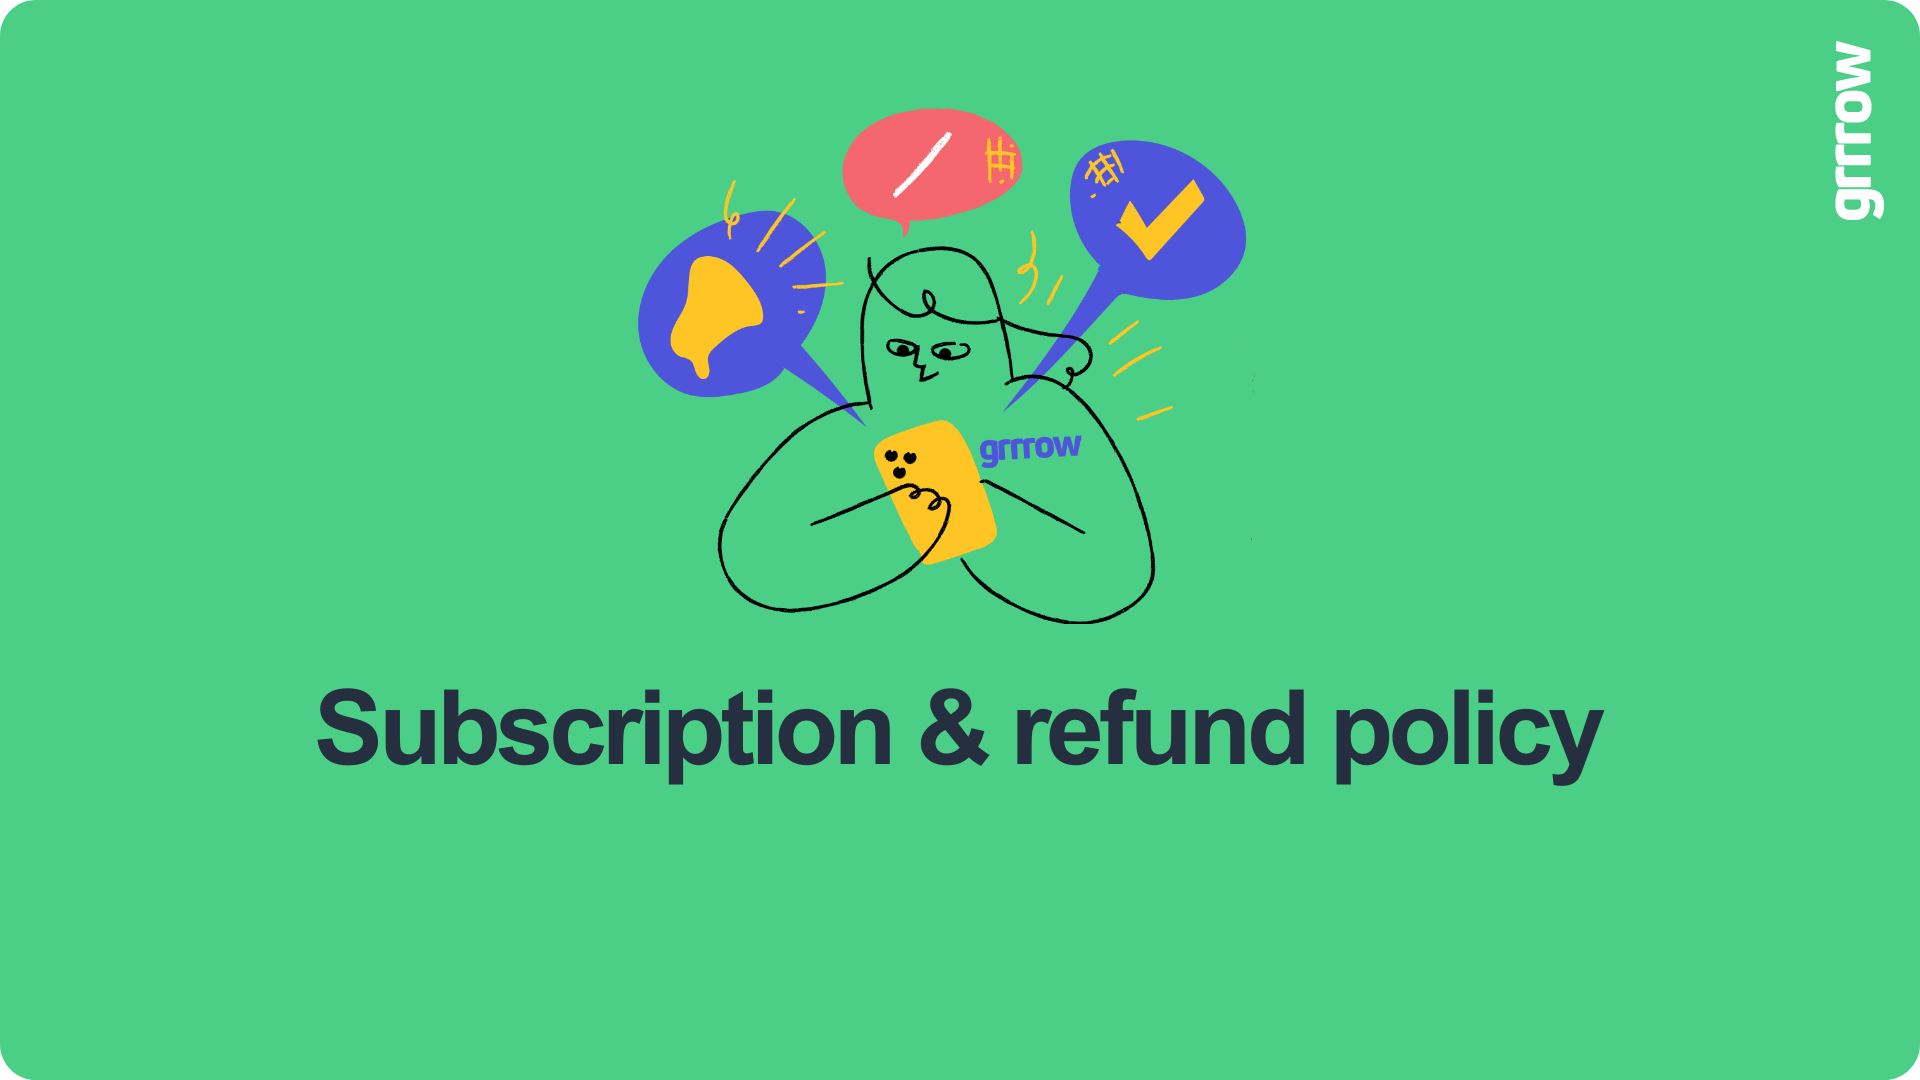 Subscription & refund policy